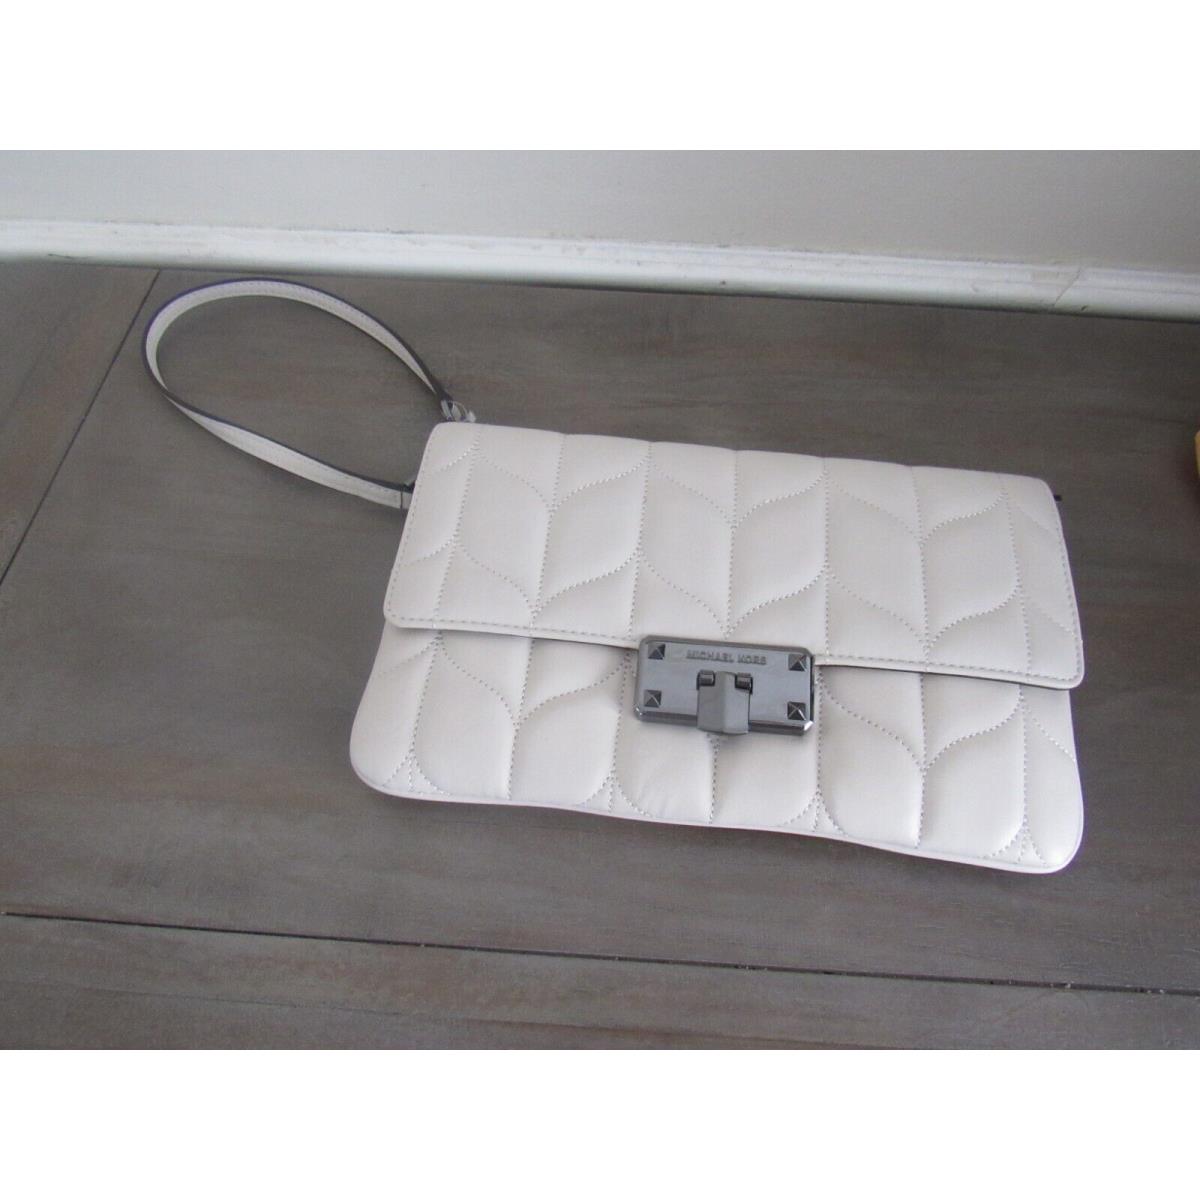 Michael Kors Peyton Clutch Vanilla Beige Large Quilted Clutch Bag: